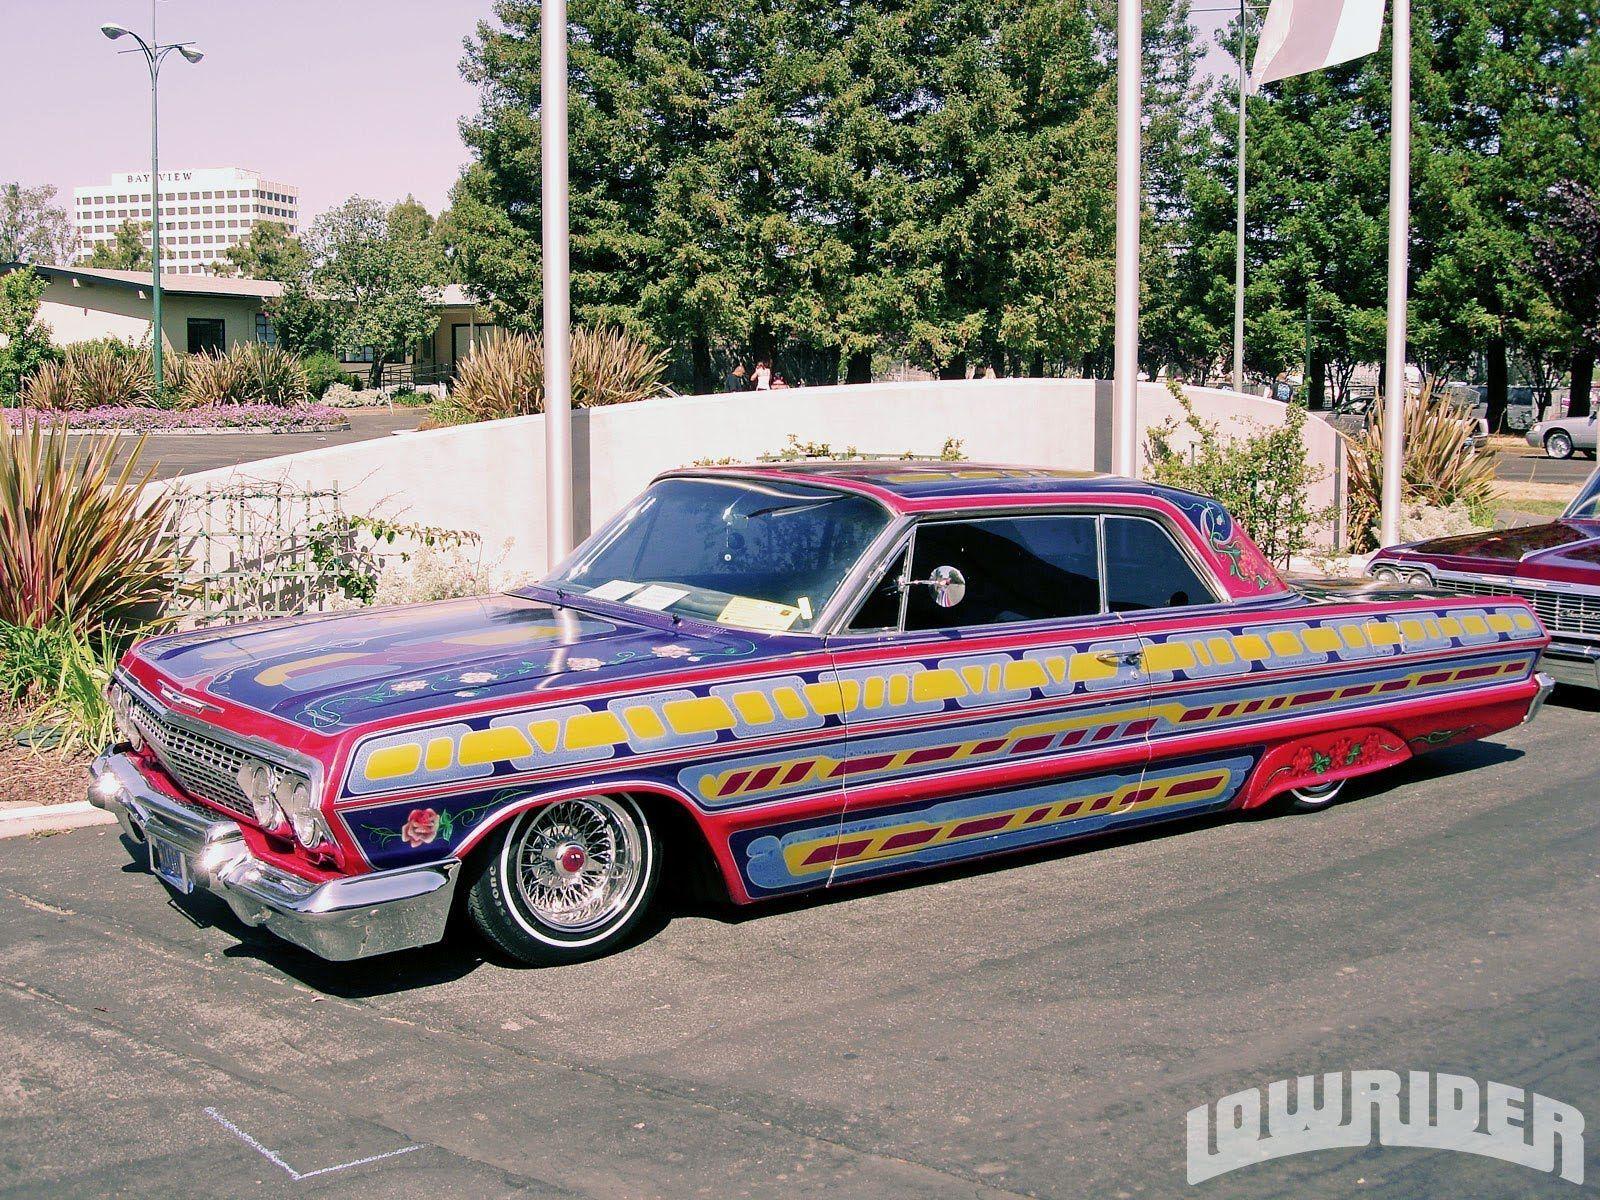 Nostalgia on Wheels: Low Riders in the Late 70's radical paintjob